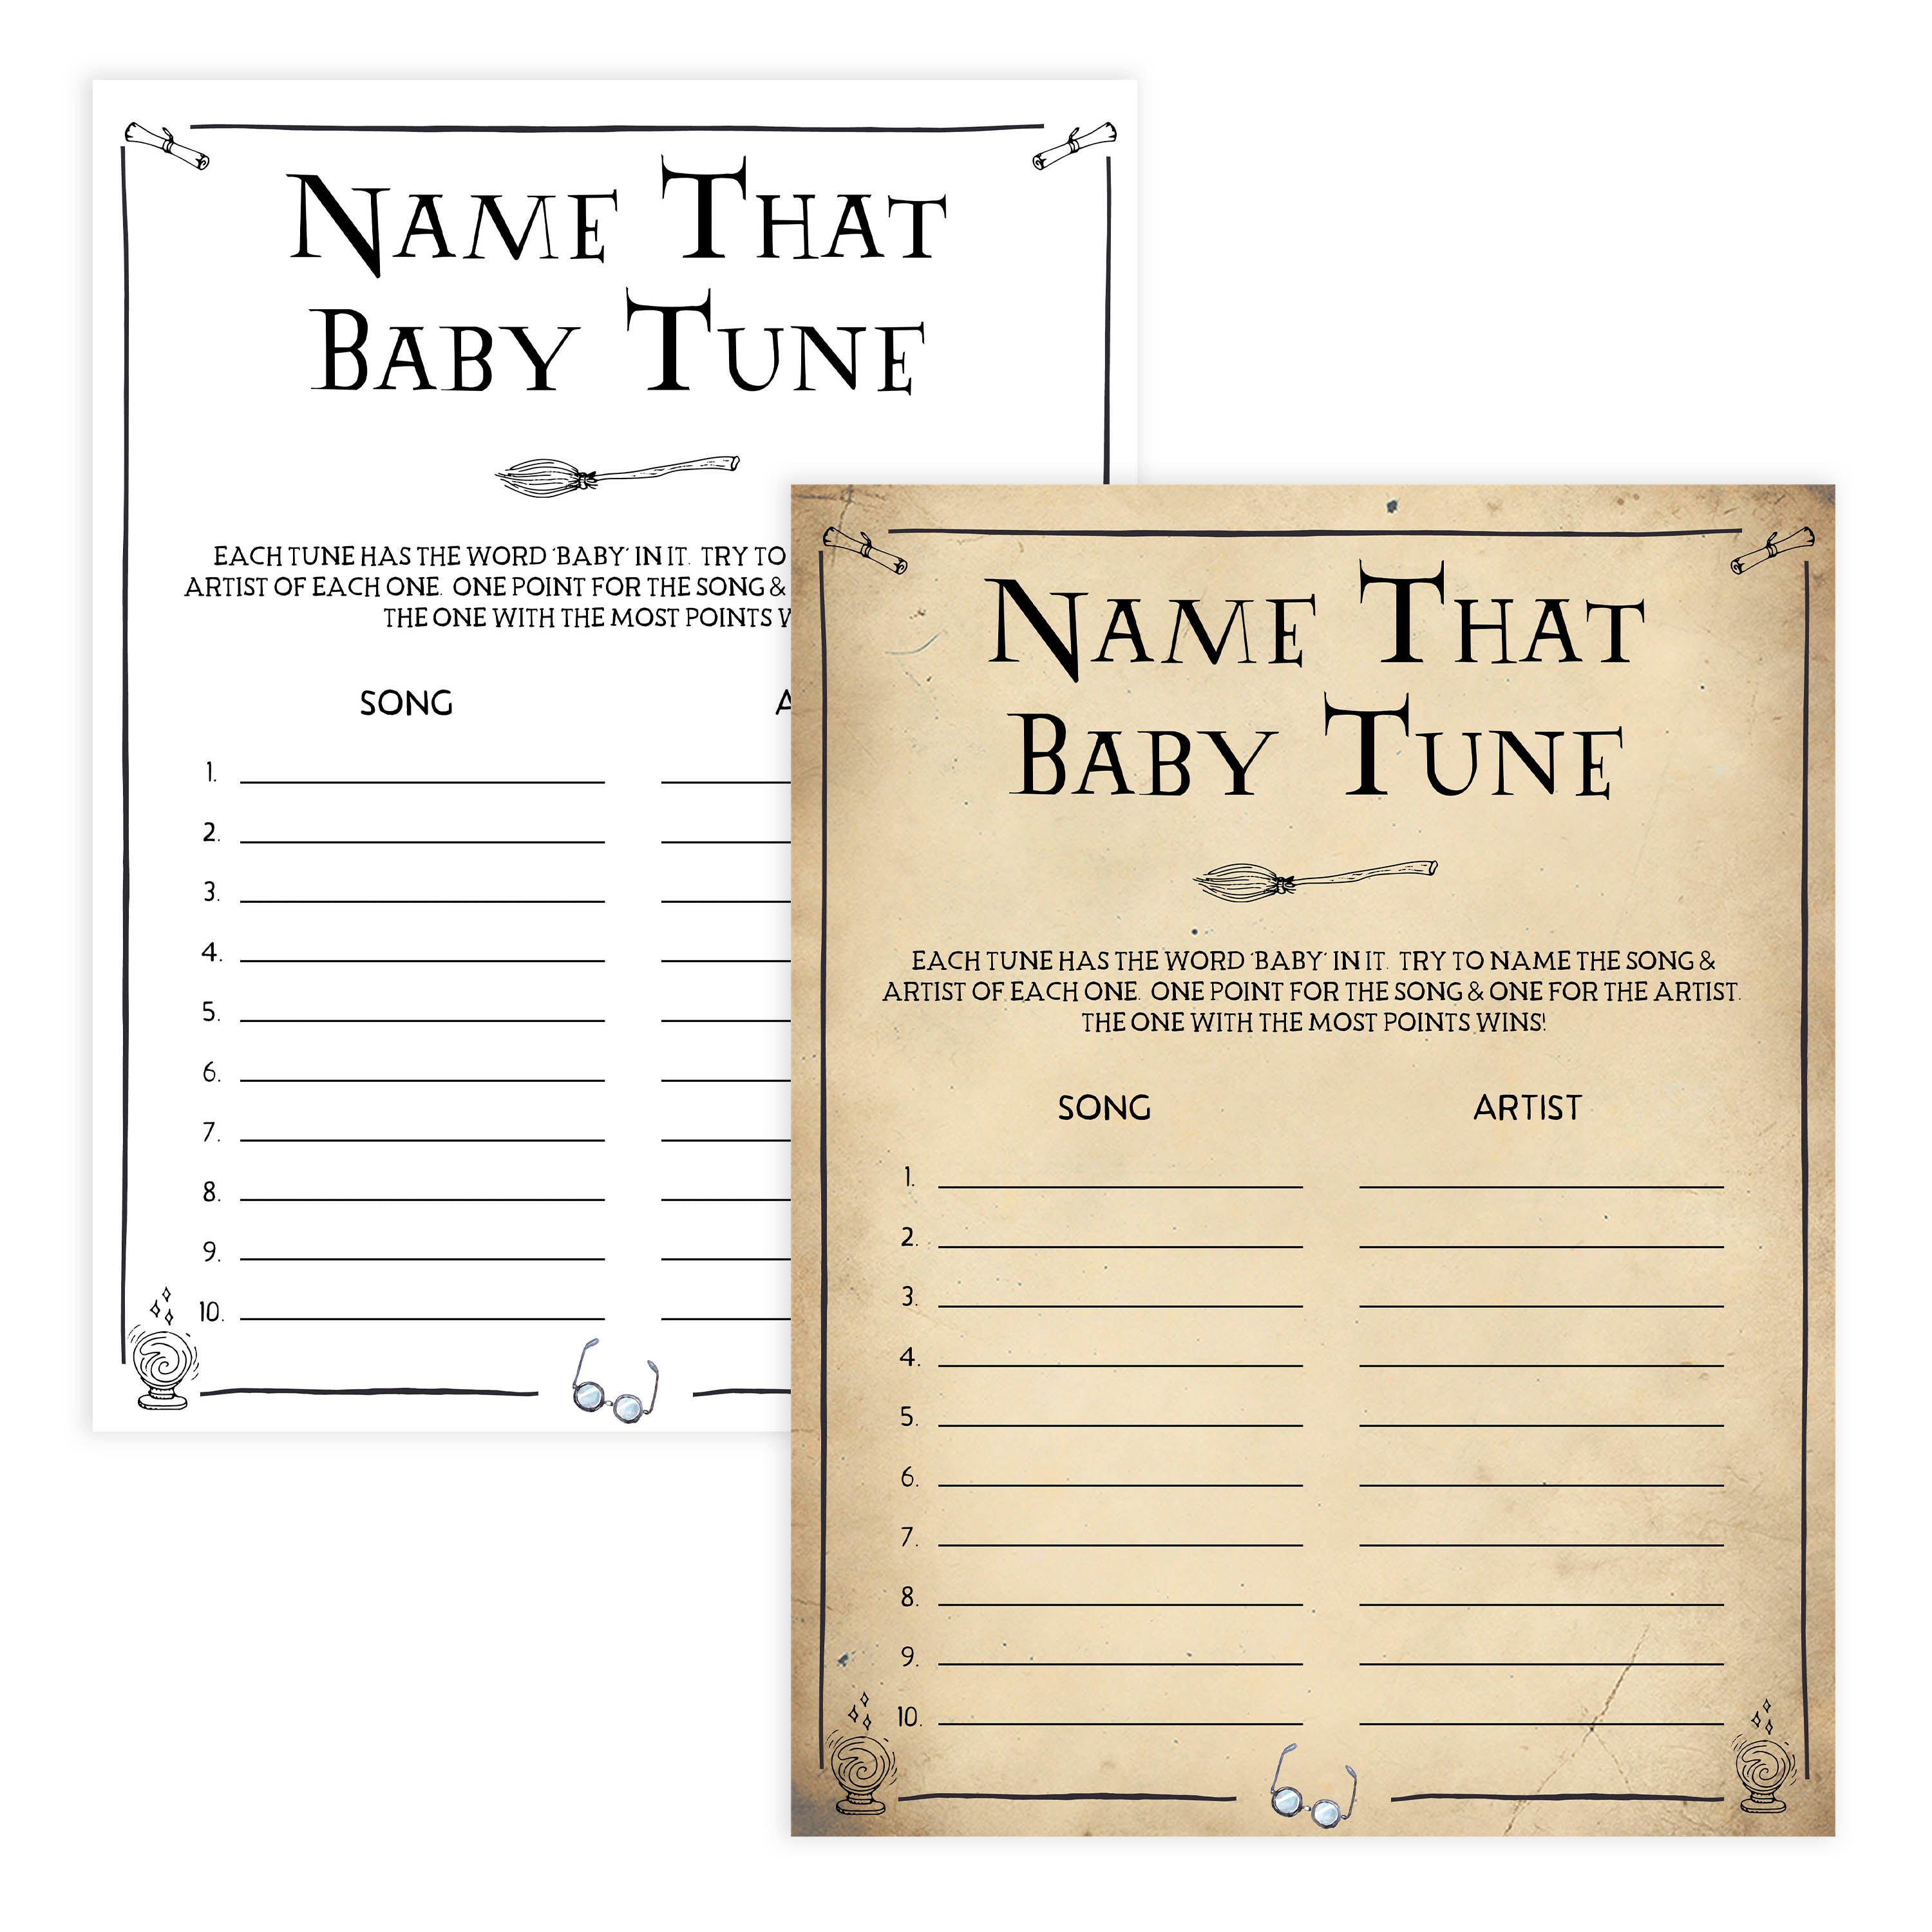 Name That Baby Tune Game, Wizard baby shower games, printable baby shower games, Harry Potter baby games, Harry Potter baby shower, fun baby shower games,  fun baby ideas